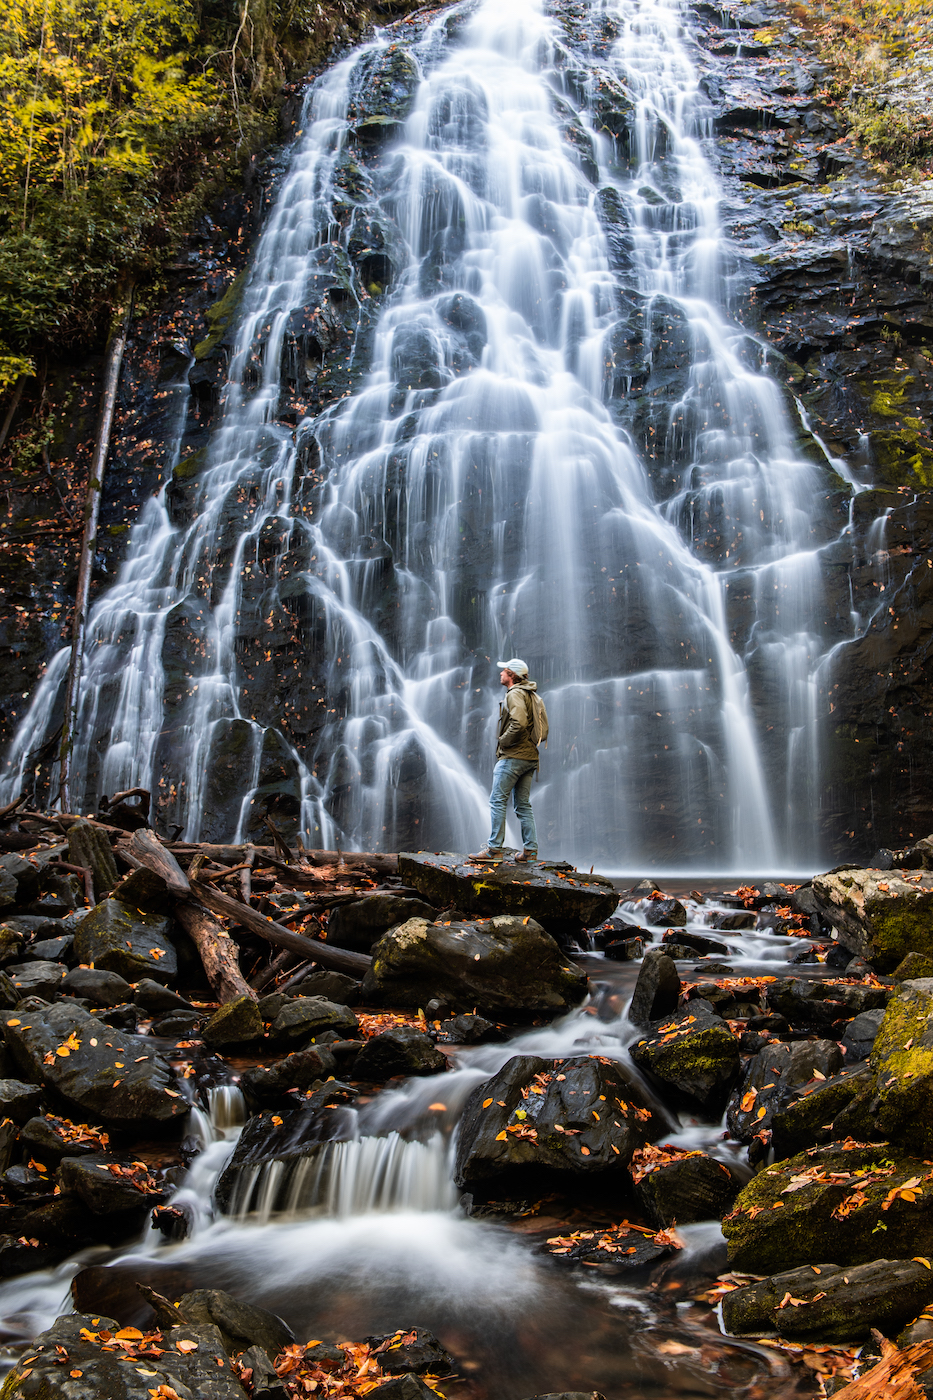 a person dedicated to conservancy stands in front of a waterfall